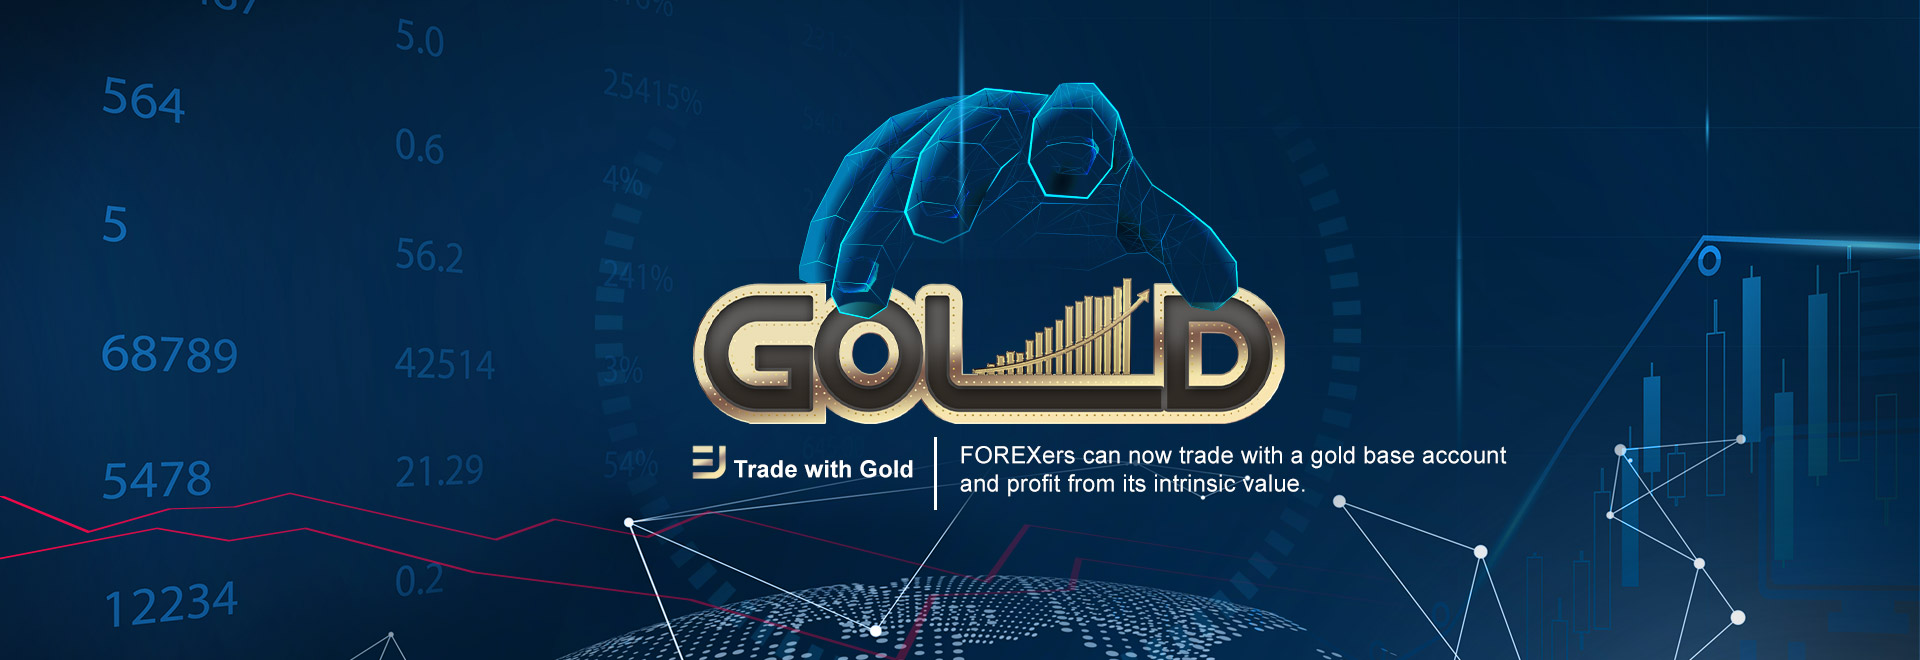 gold trading